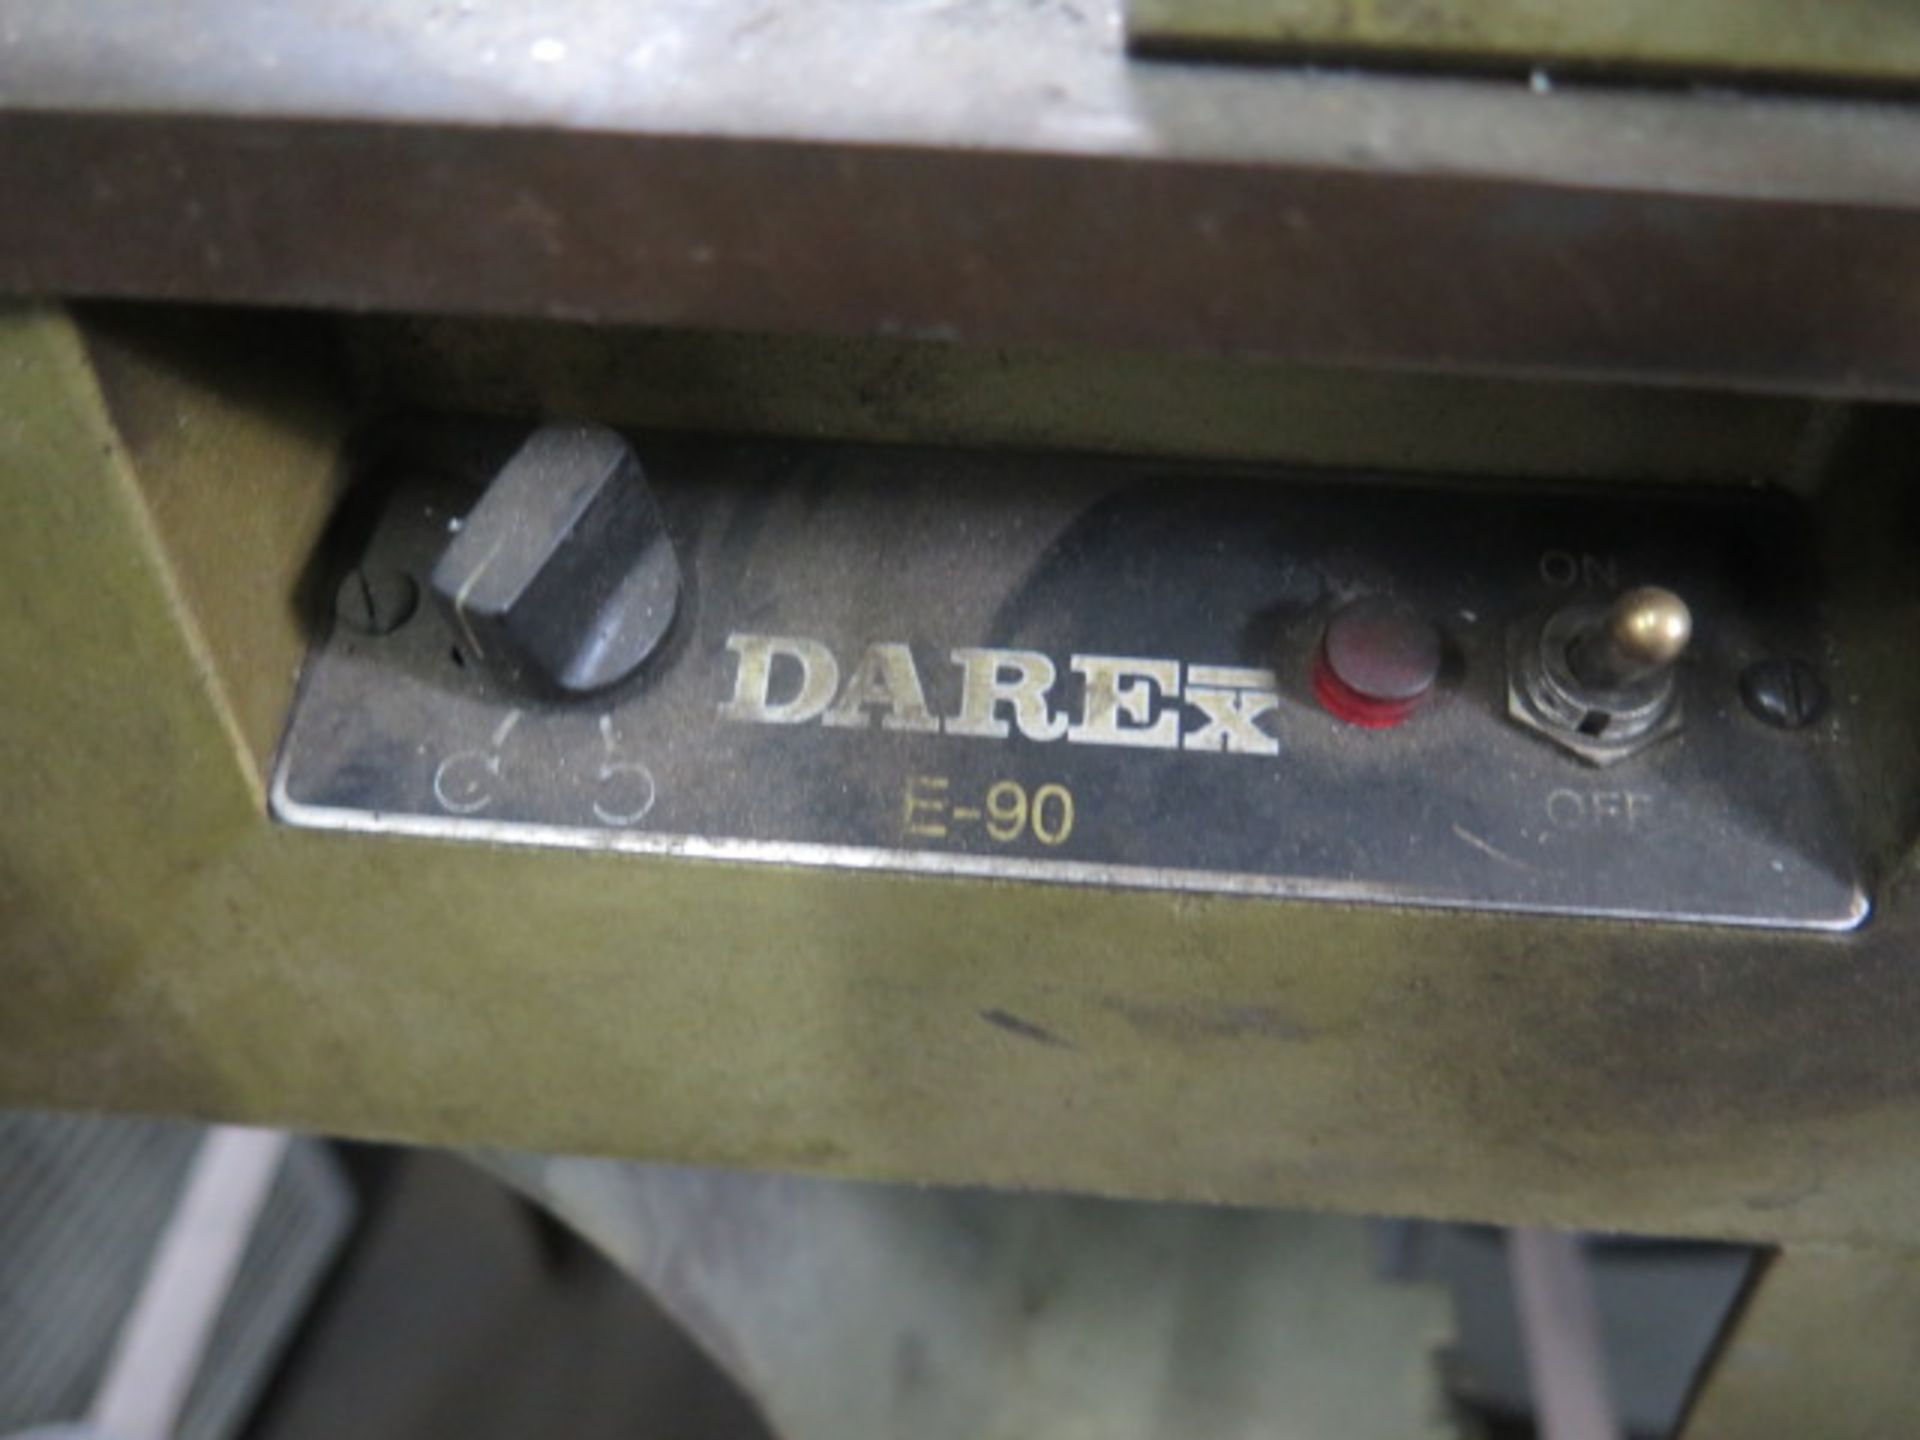 Darex E90 Endmill Sharpener w/ 5C Air Fixture, Stand (SOLD AS-IS - NO WARRANTY) - Image 6 of 6